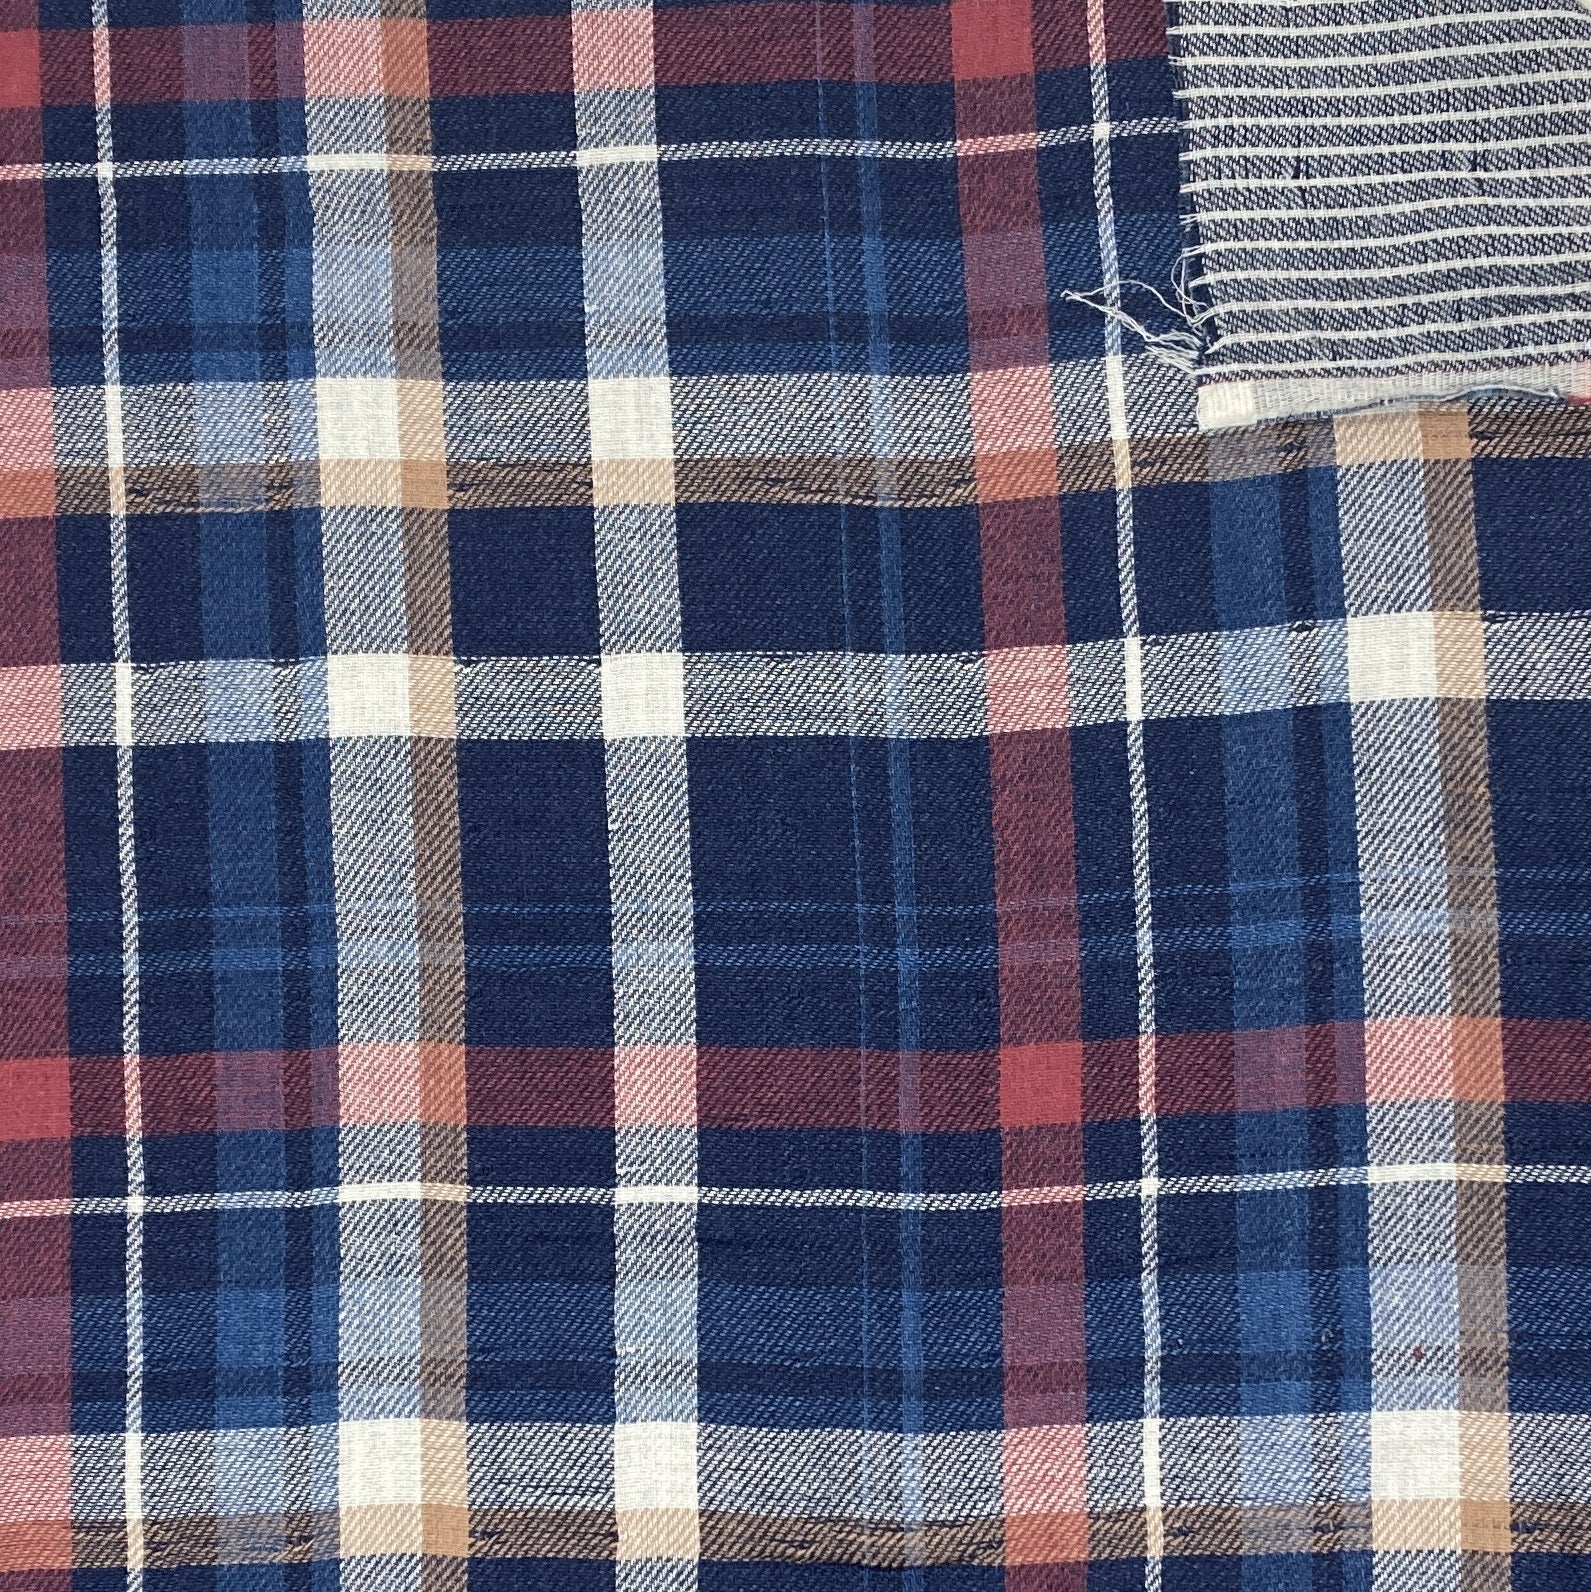 Red Navy Blue Royal Blue and Cream Plaid Cotton Light Weight Double Gauze Fabric Fabric, Raspberry Creek Fabrics, watermarked, restored